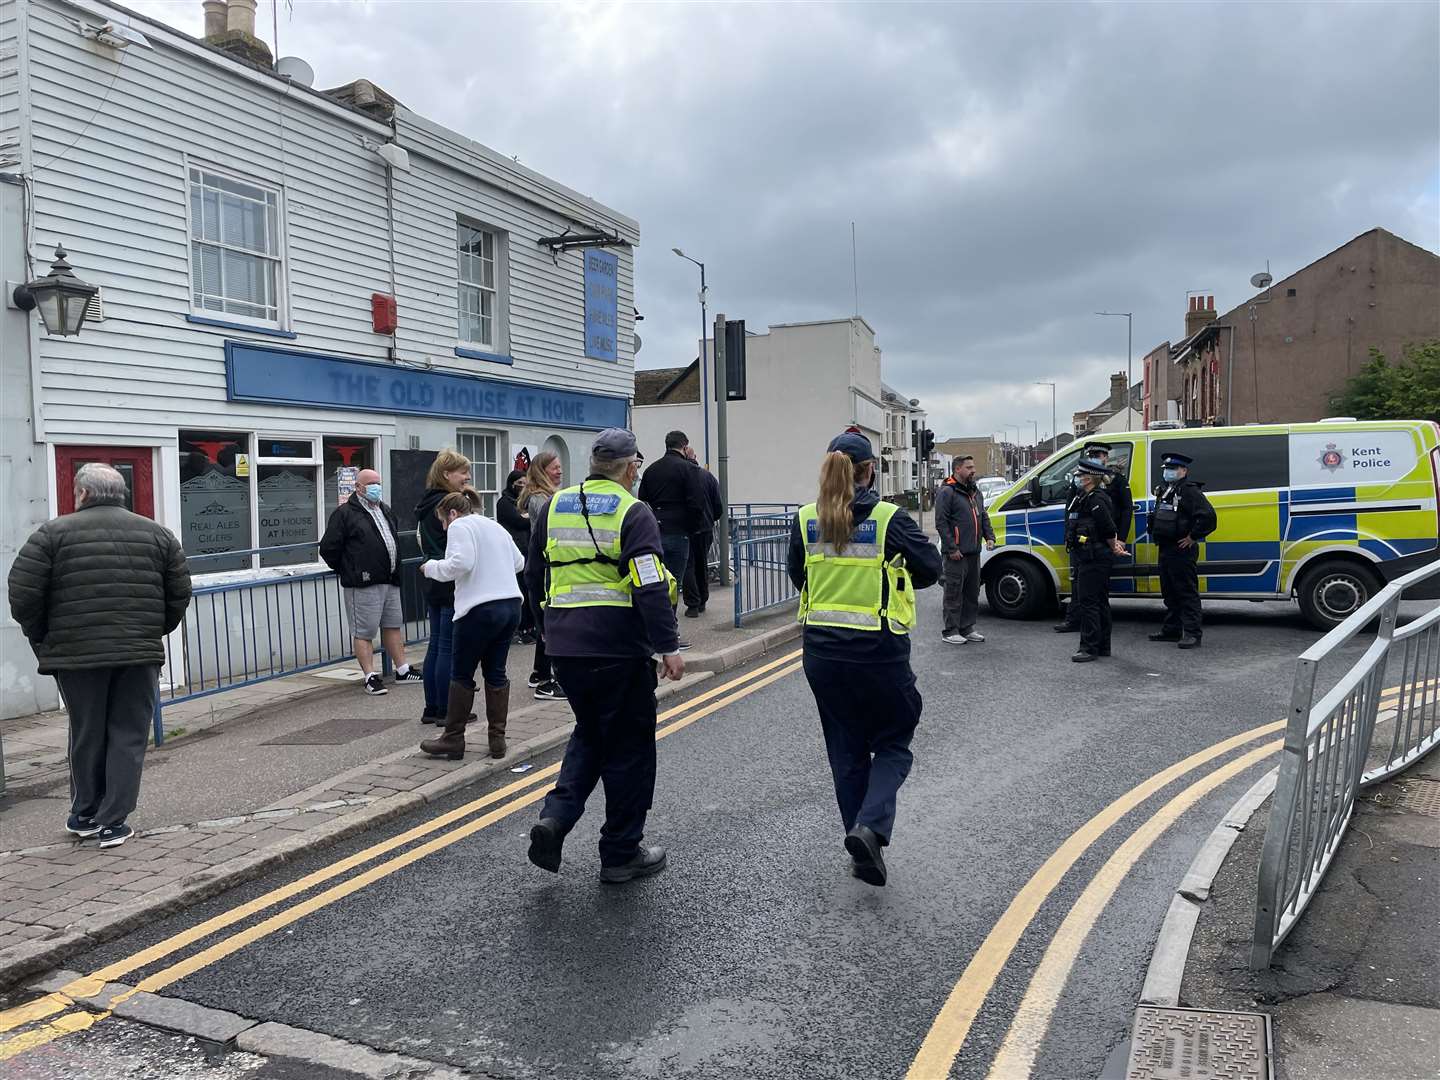 Police were called to a protest by shopkeepers in Sheerness High Street on Monday, May 17